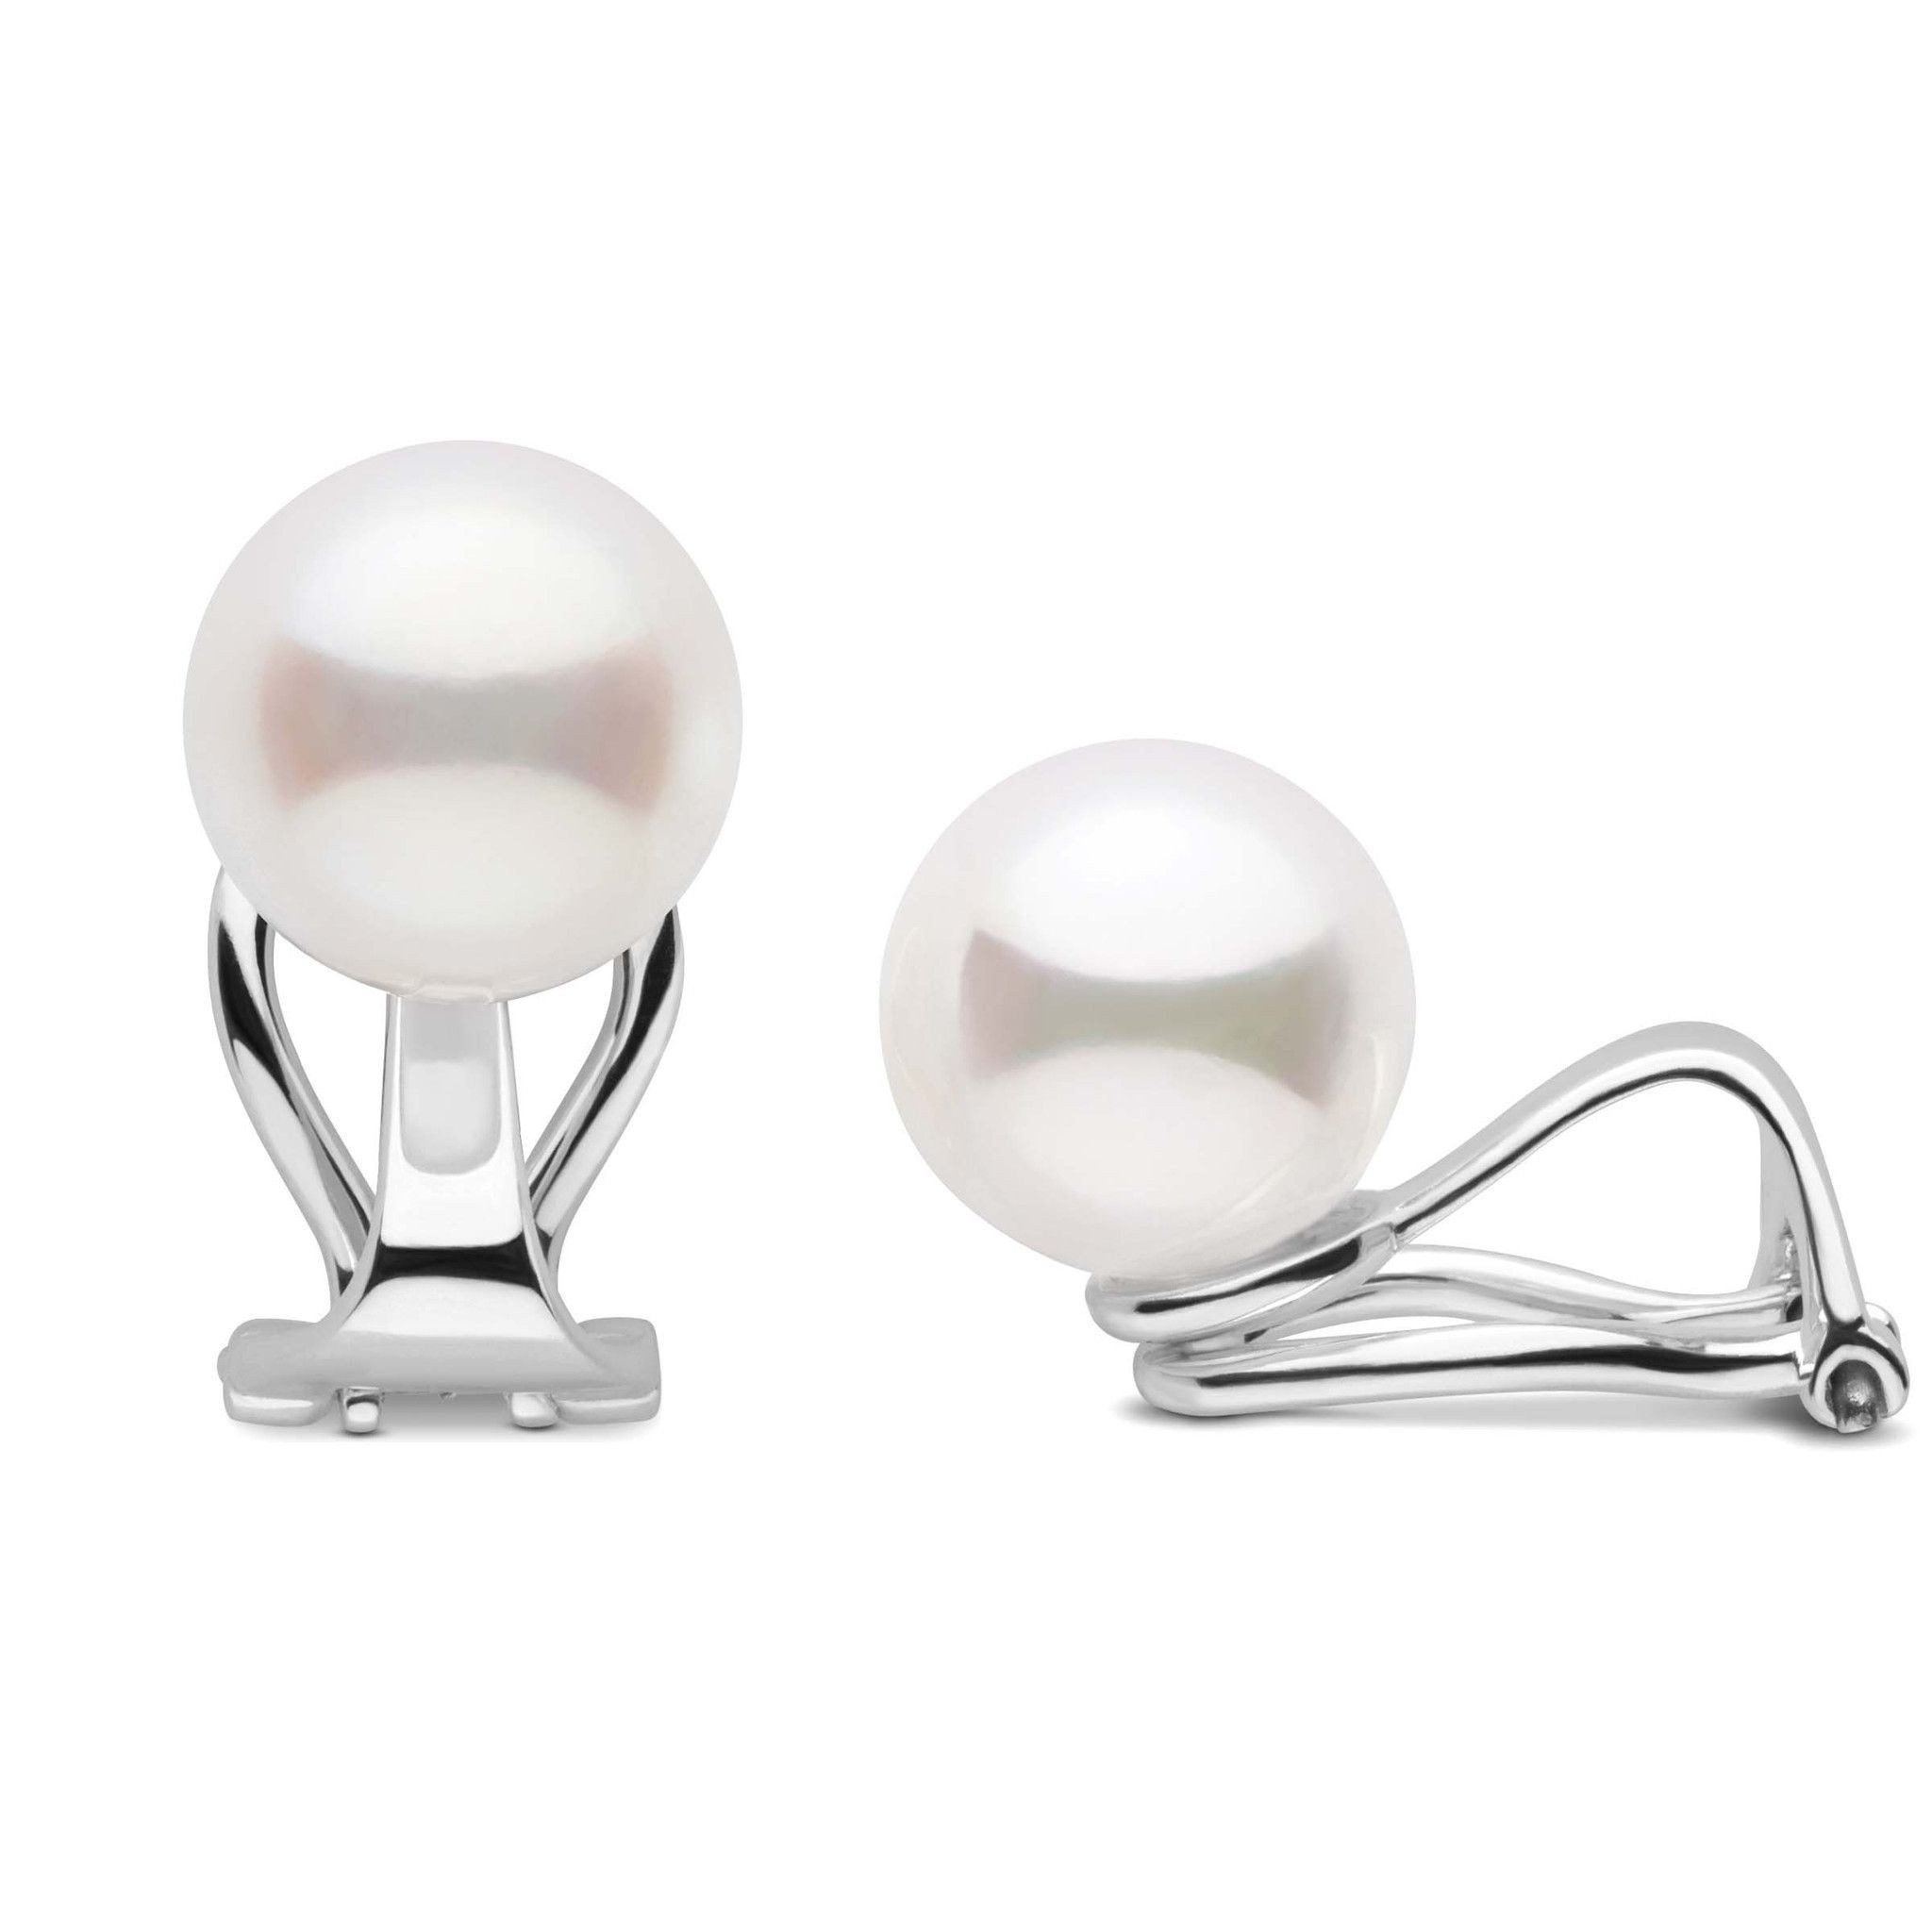 Freshadama freshwater 10.0-10.5 mm Clip-on Pearl Earrings for non-pierced ears in white gold